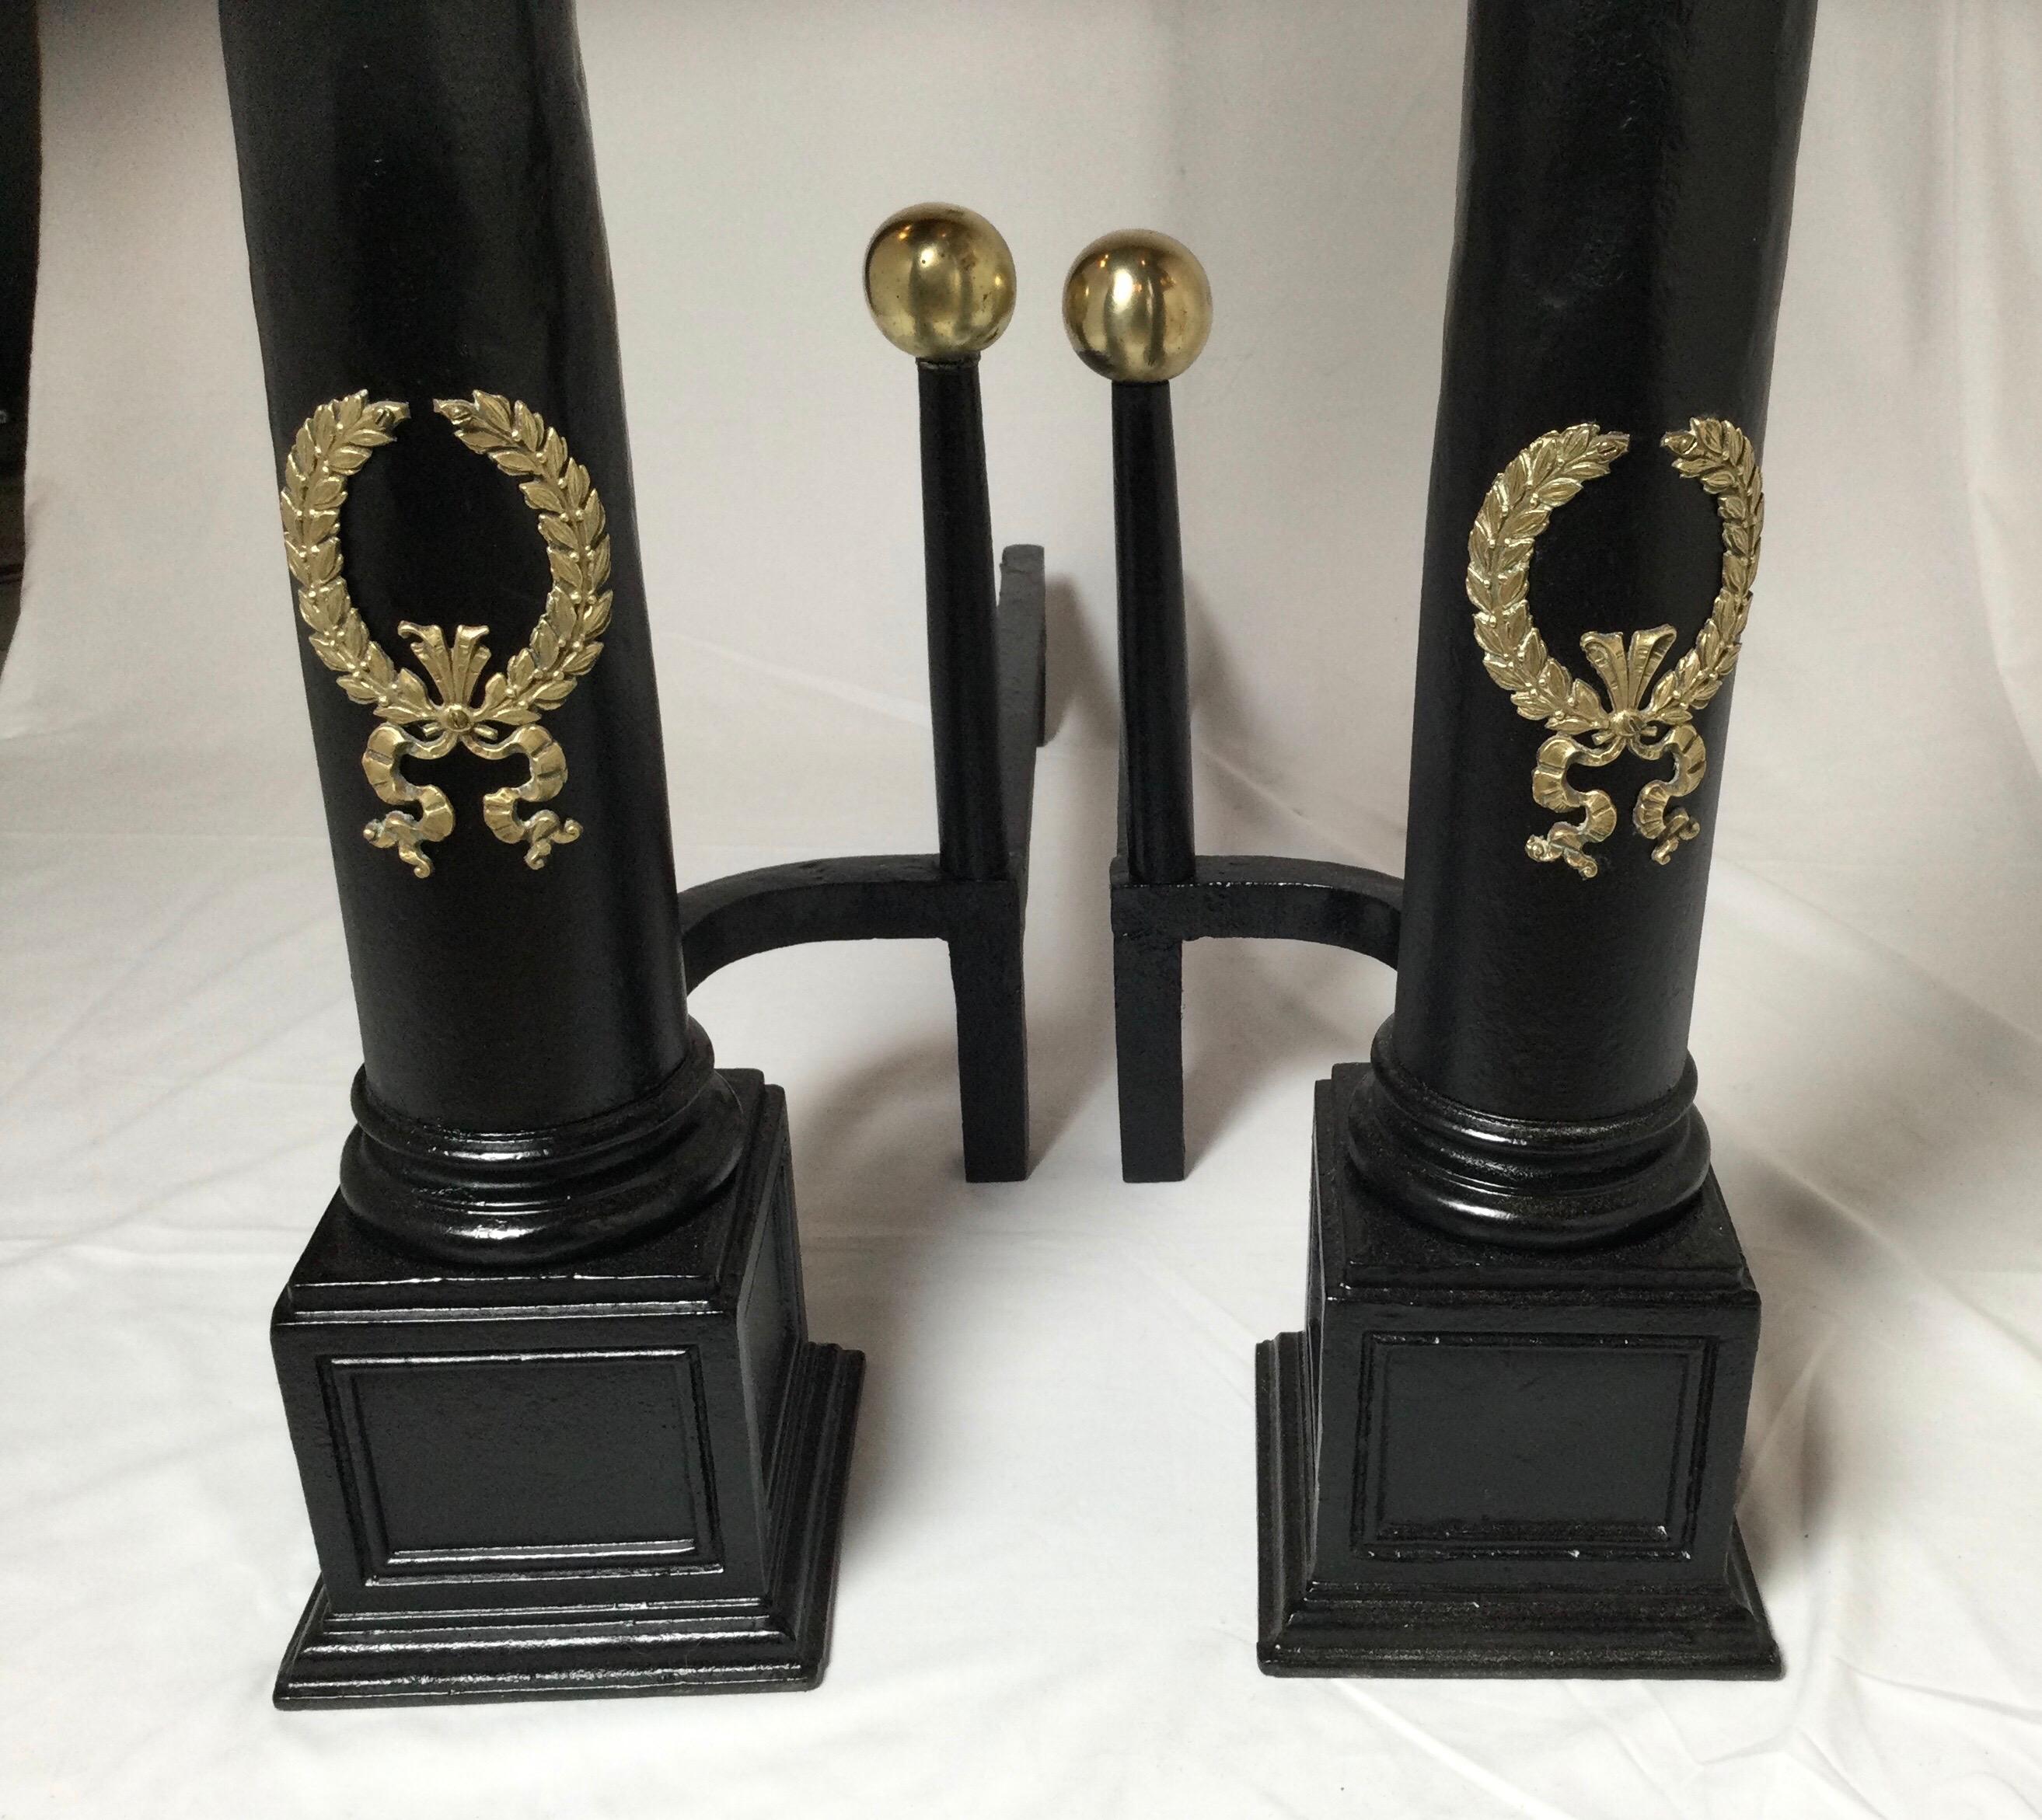 American Circa 1900 Monumental Column Andirons With Large Brass Ball And Wreath Mounts